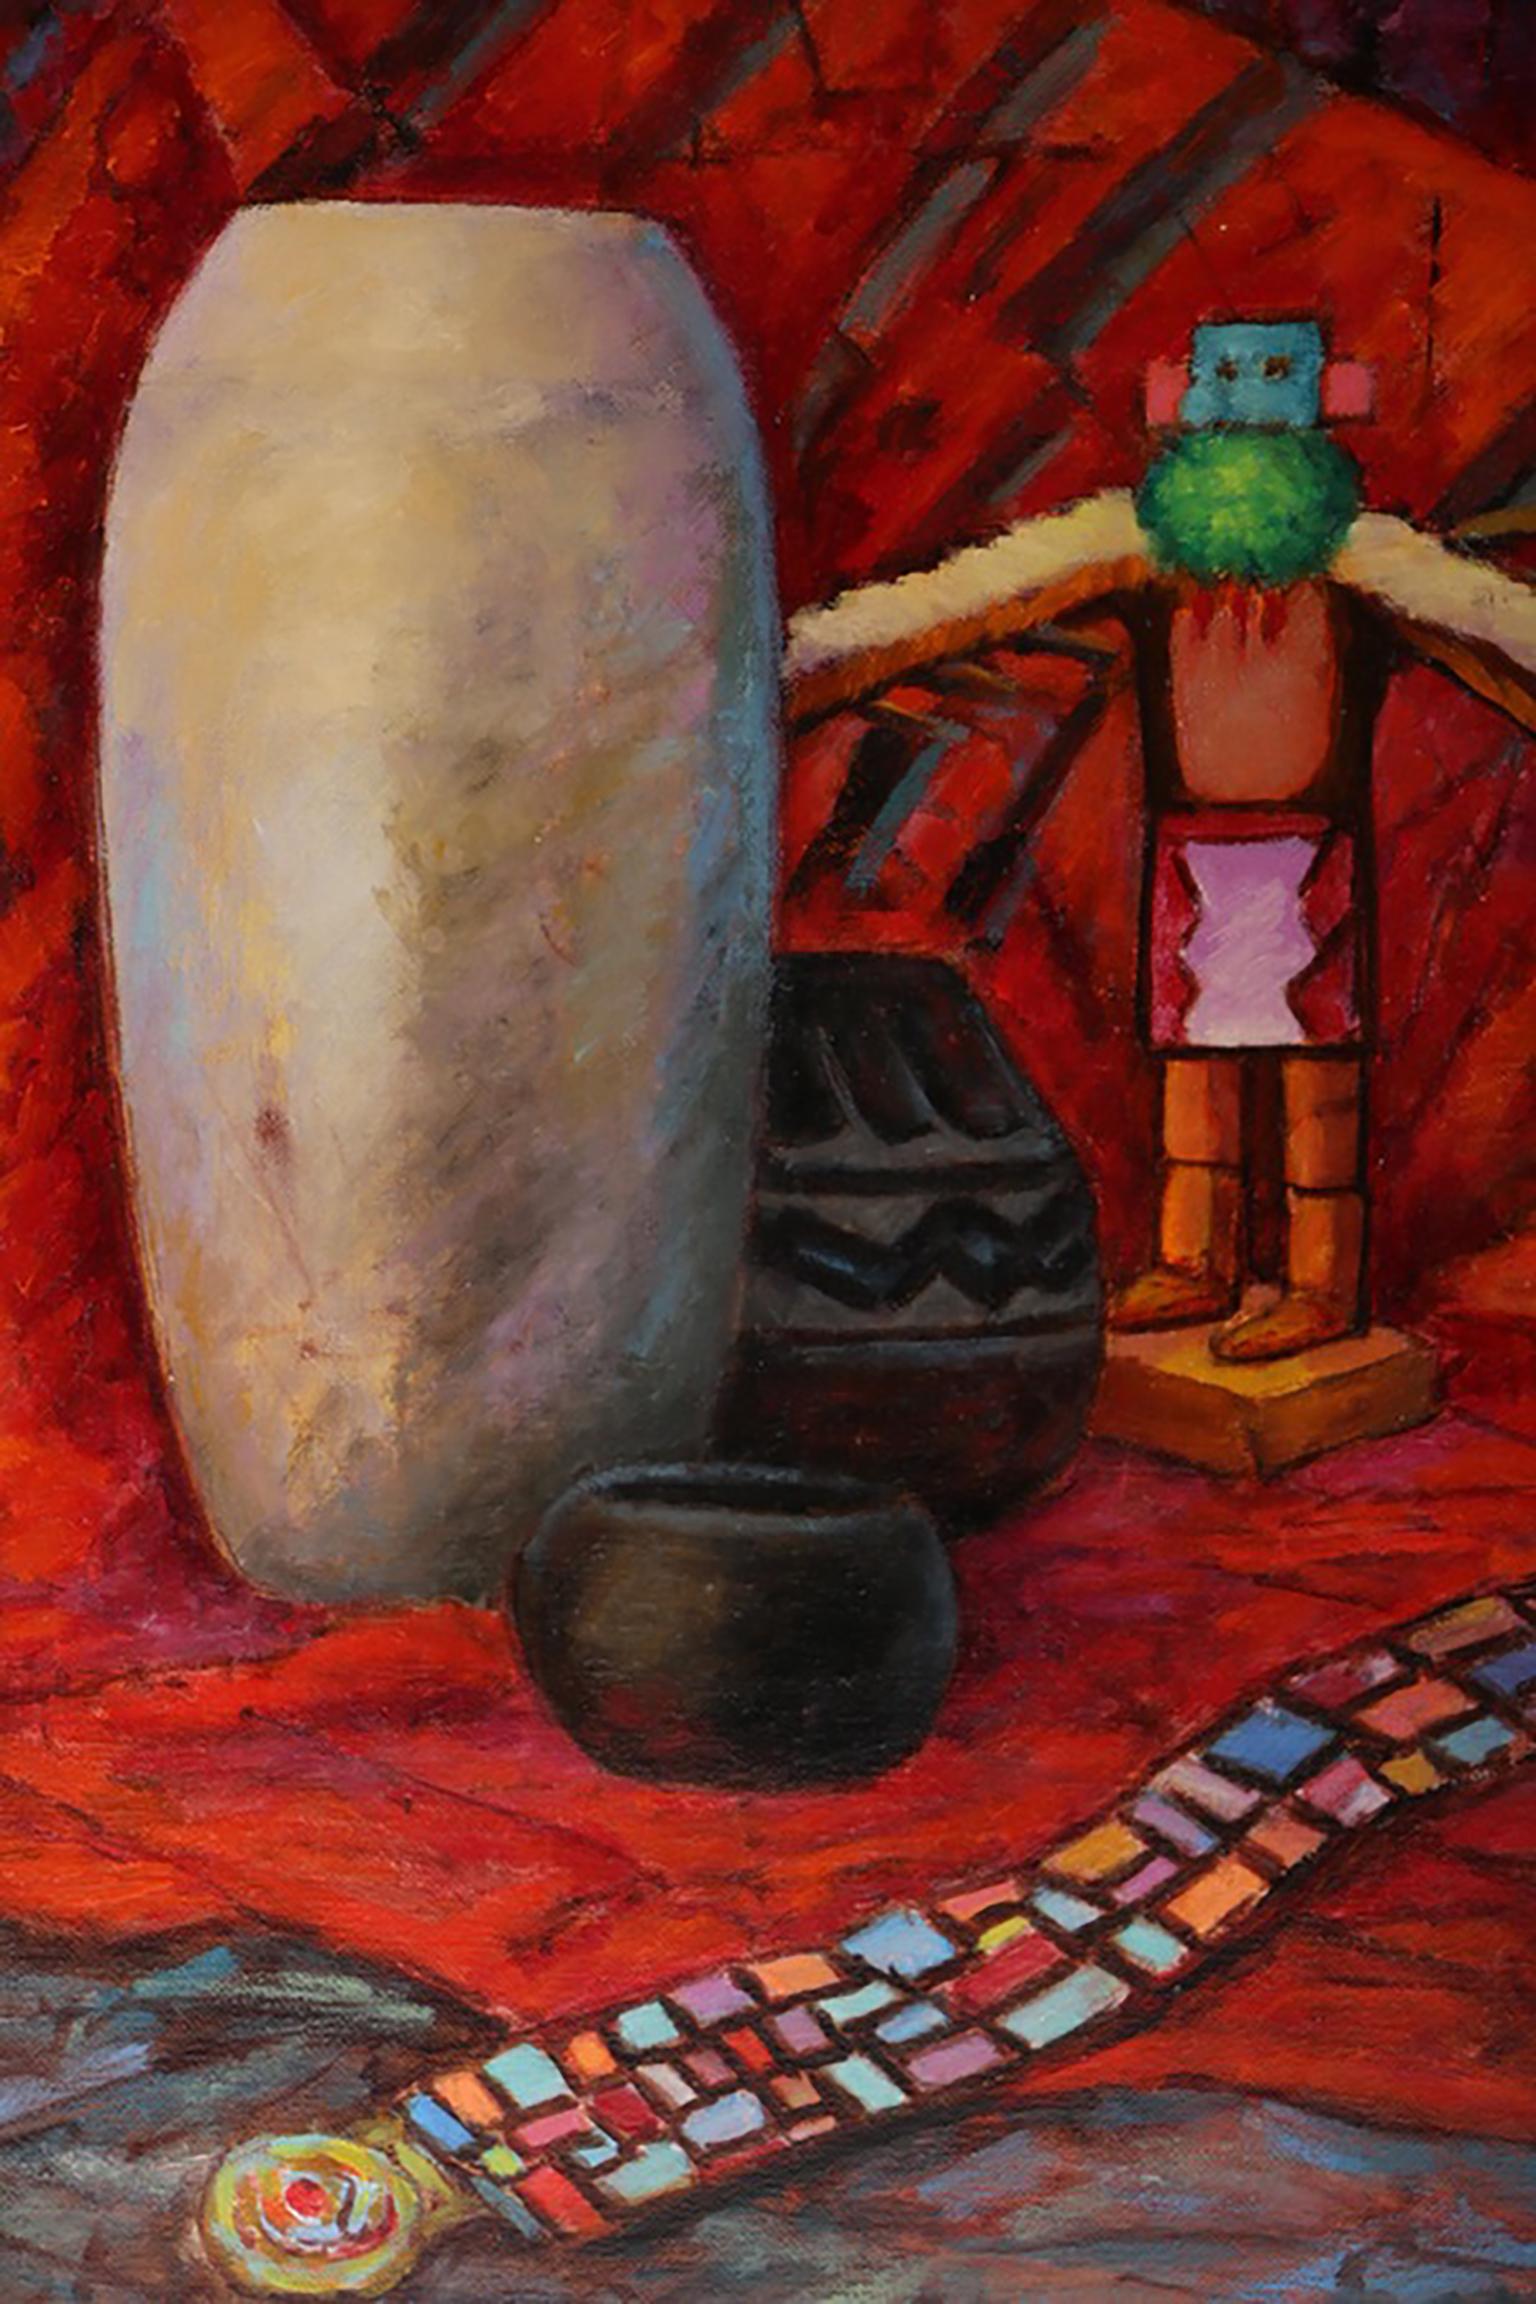 An original oil painting on canvas by well listed American painter Jacques Colbert (1913-1995). It depicts a Native American arrangement of a pale tall vase, two shorter vases, a vibrant mosaiced belt, and a figural stattuette, against draped red